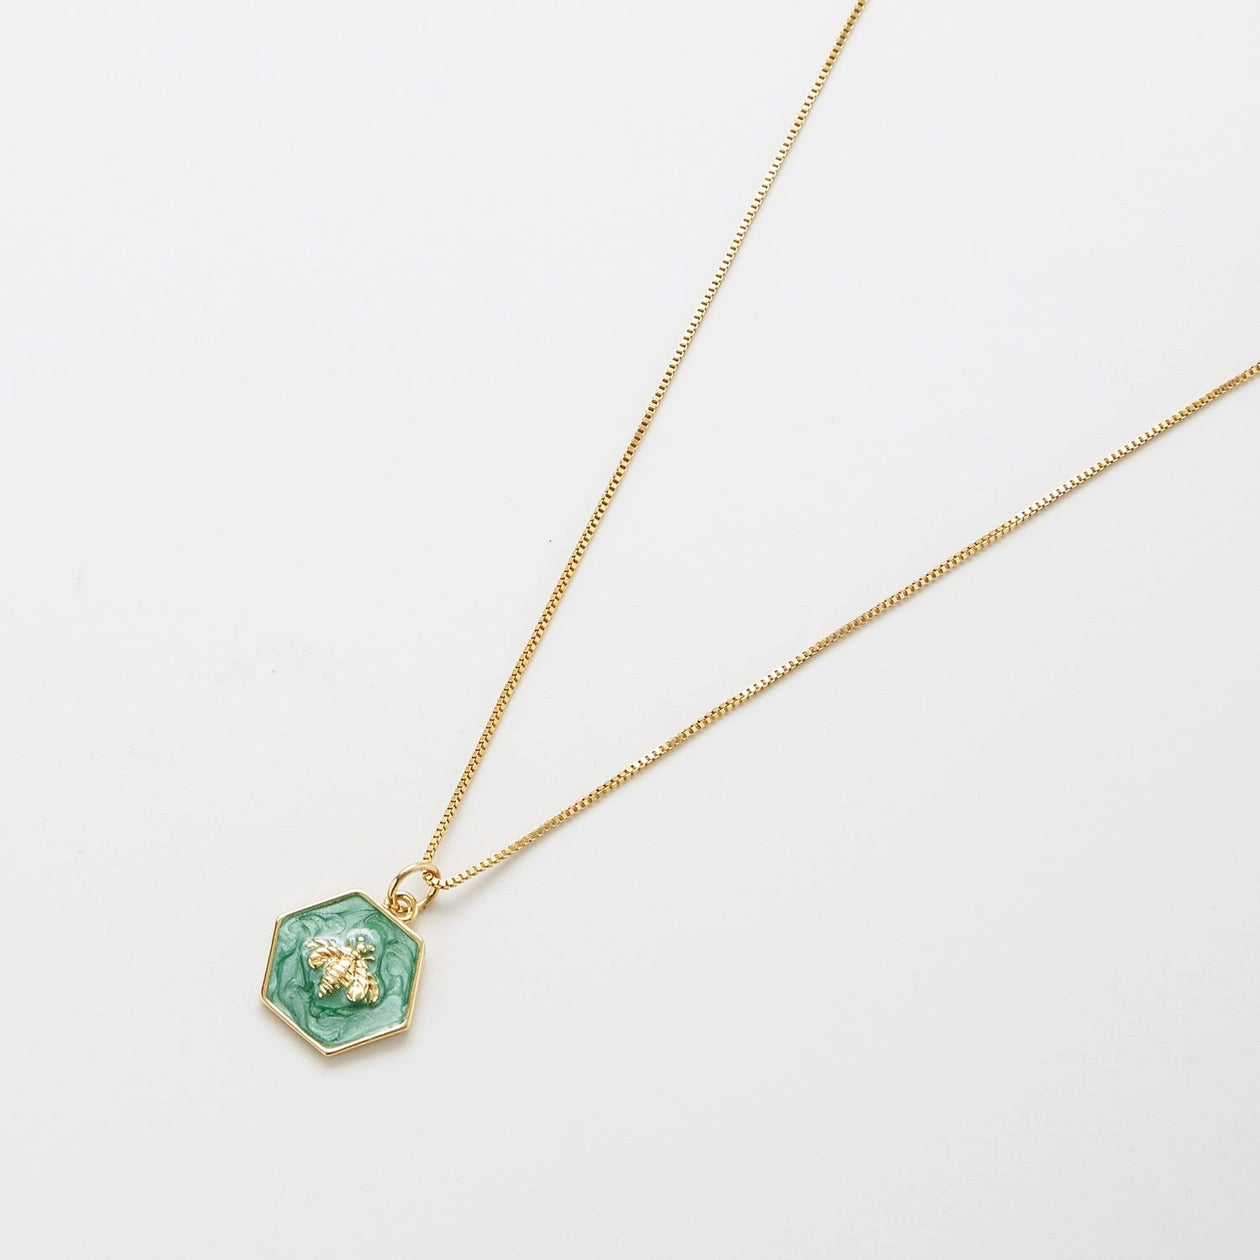 Green Bee Necklace - Proper